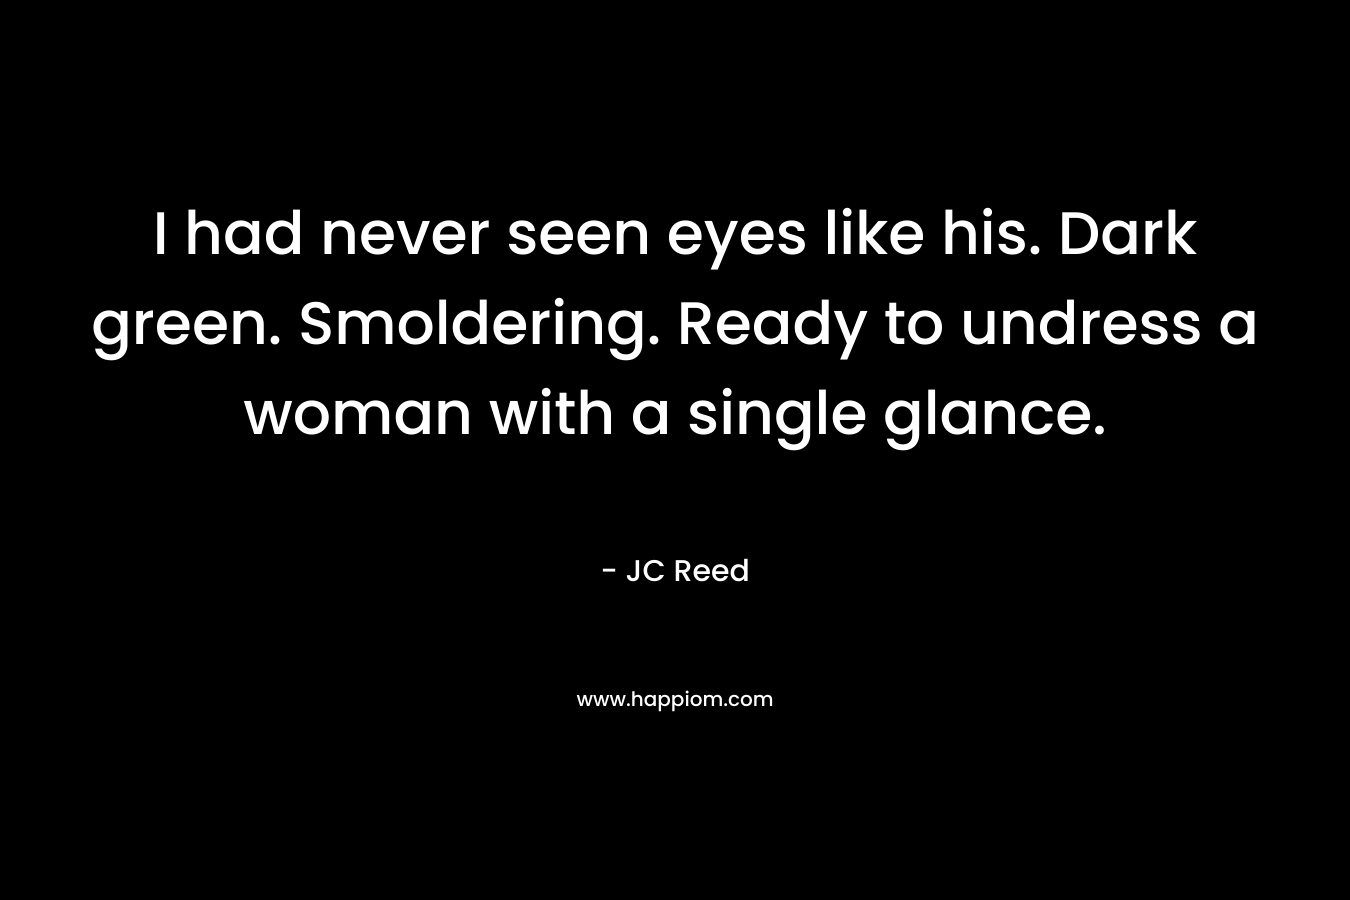 I had never seen eyes like his. Dark green. Smoldering. Ready to undress a woman with a single glance. – JC Reed